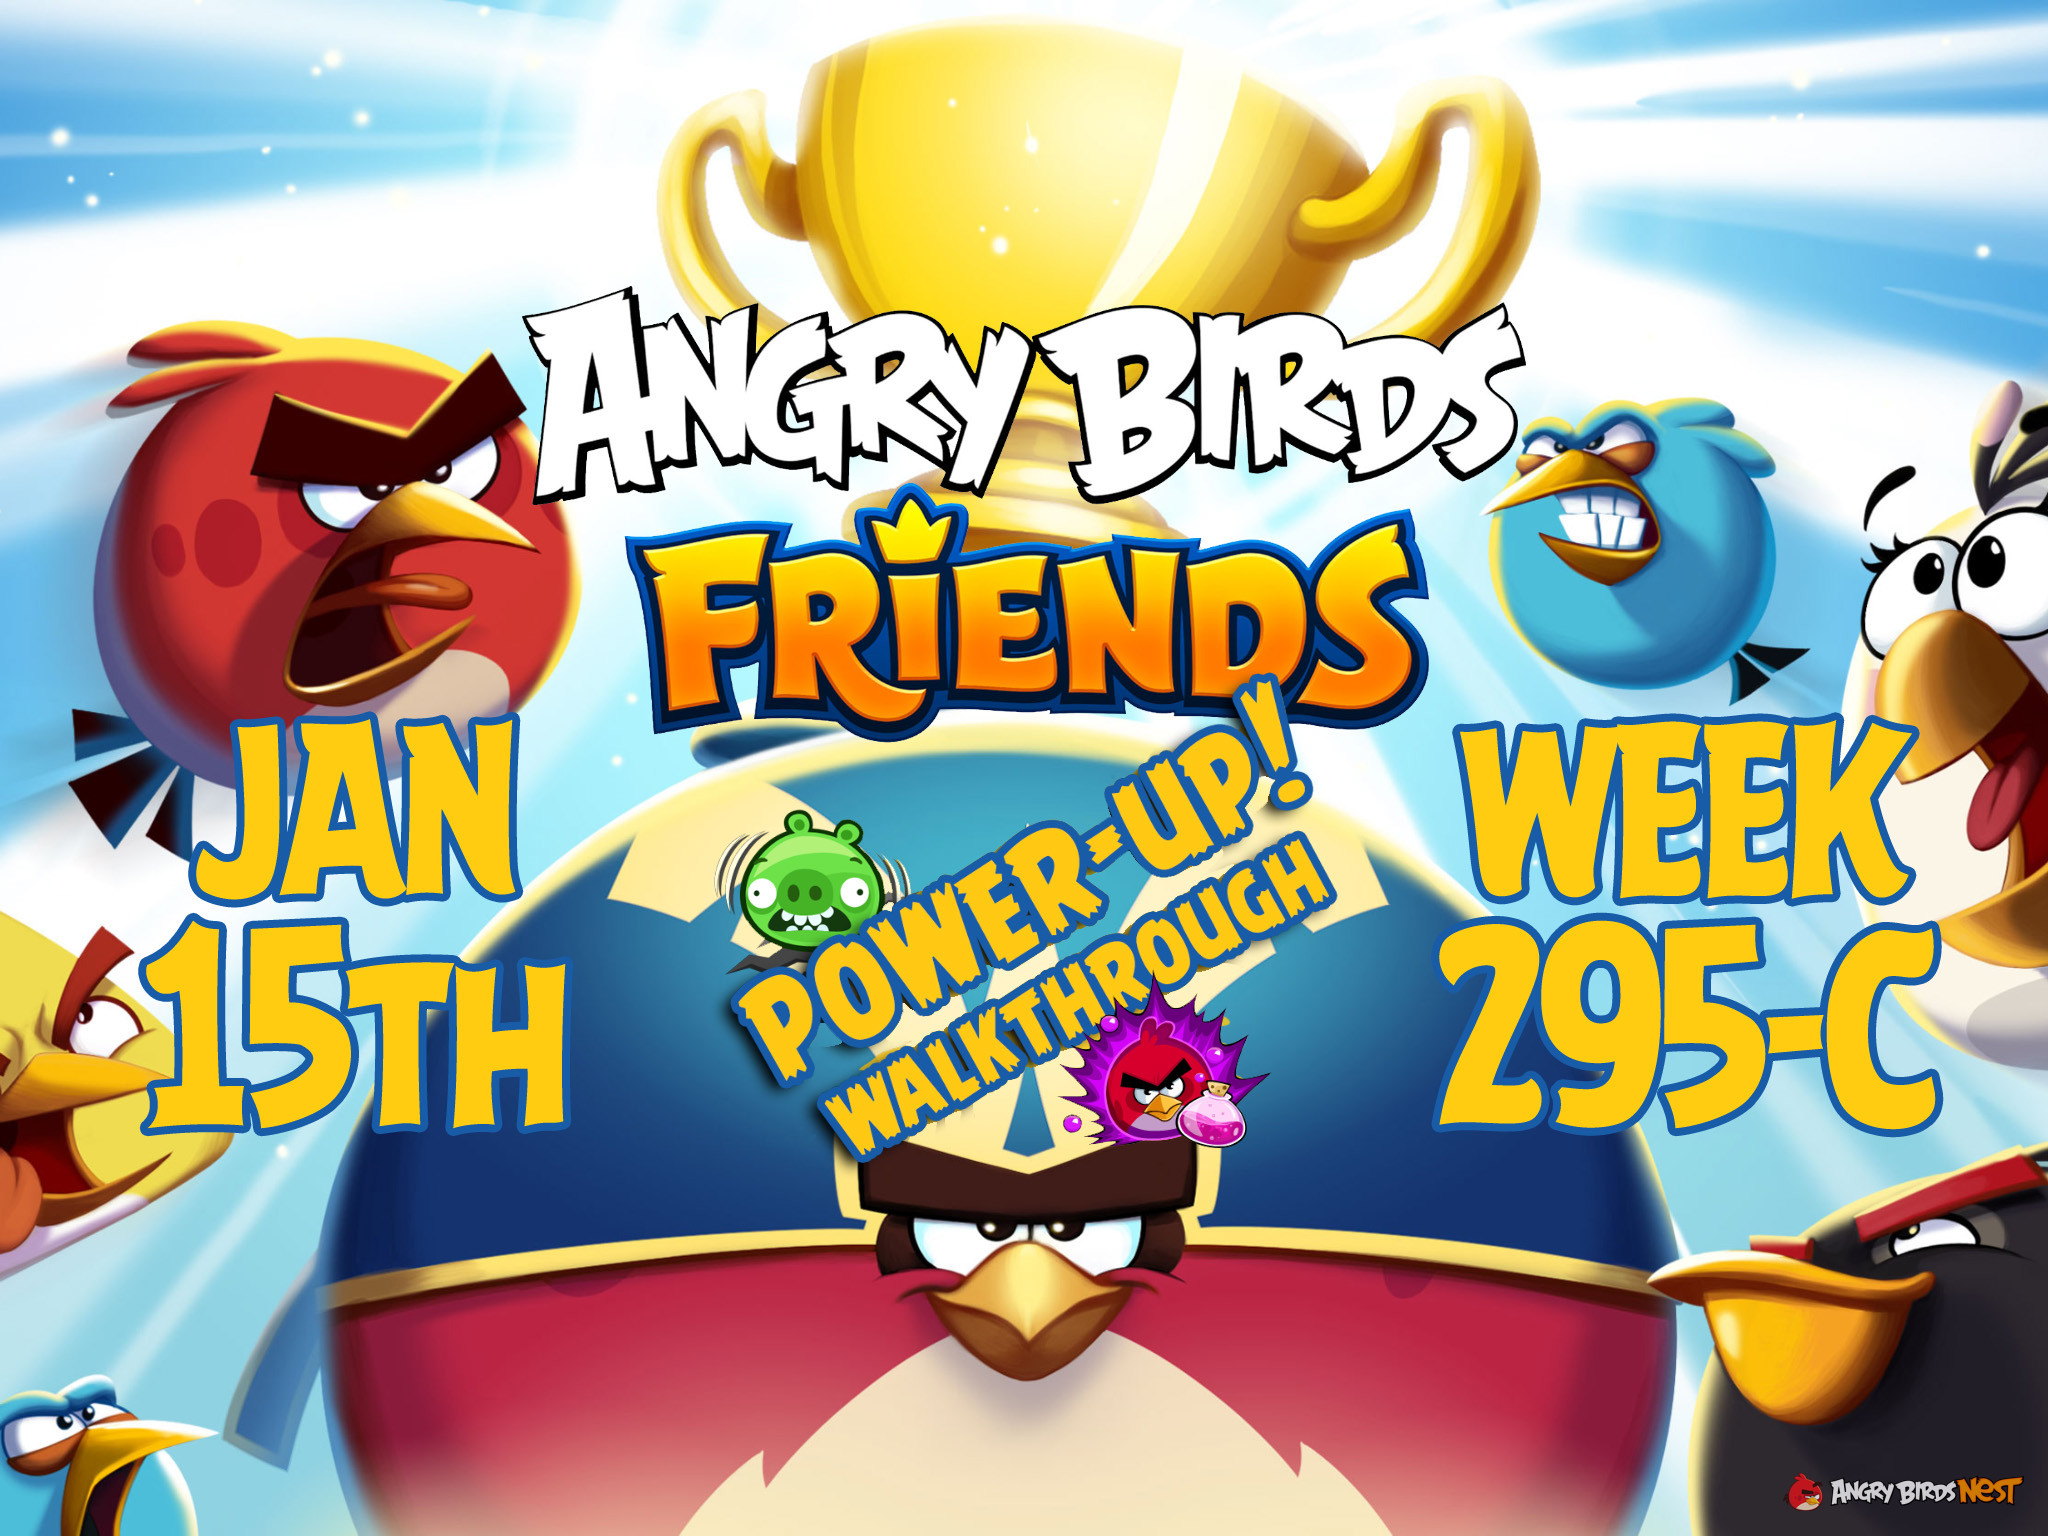 Angry Birds Friends Tournament Week 295-C Feature Image PU